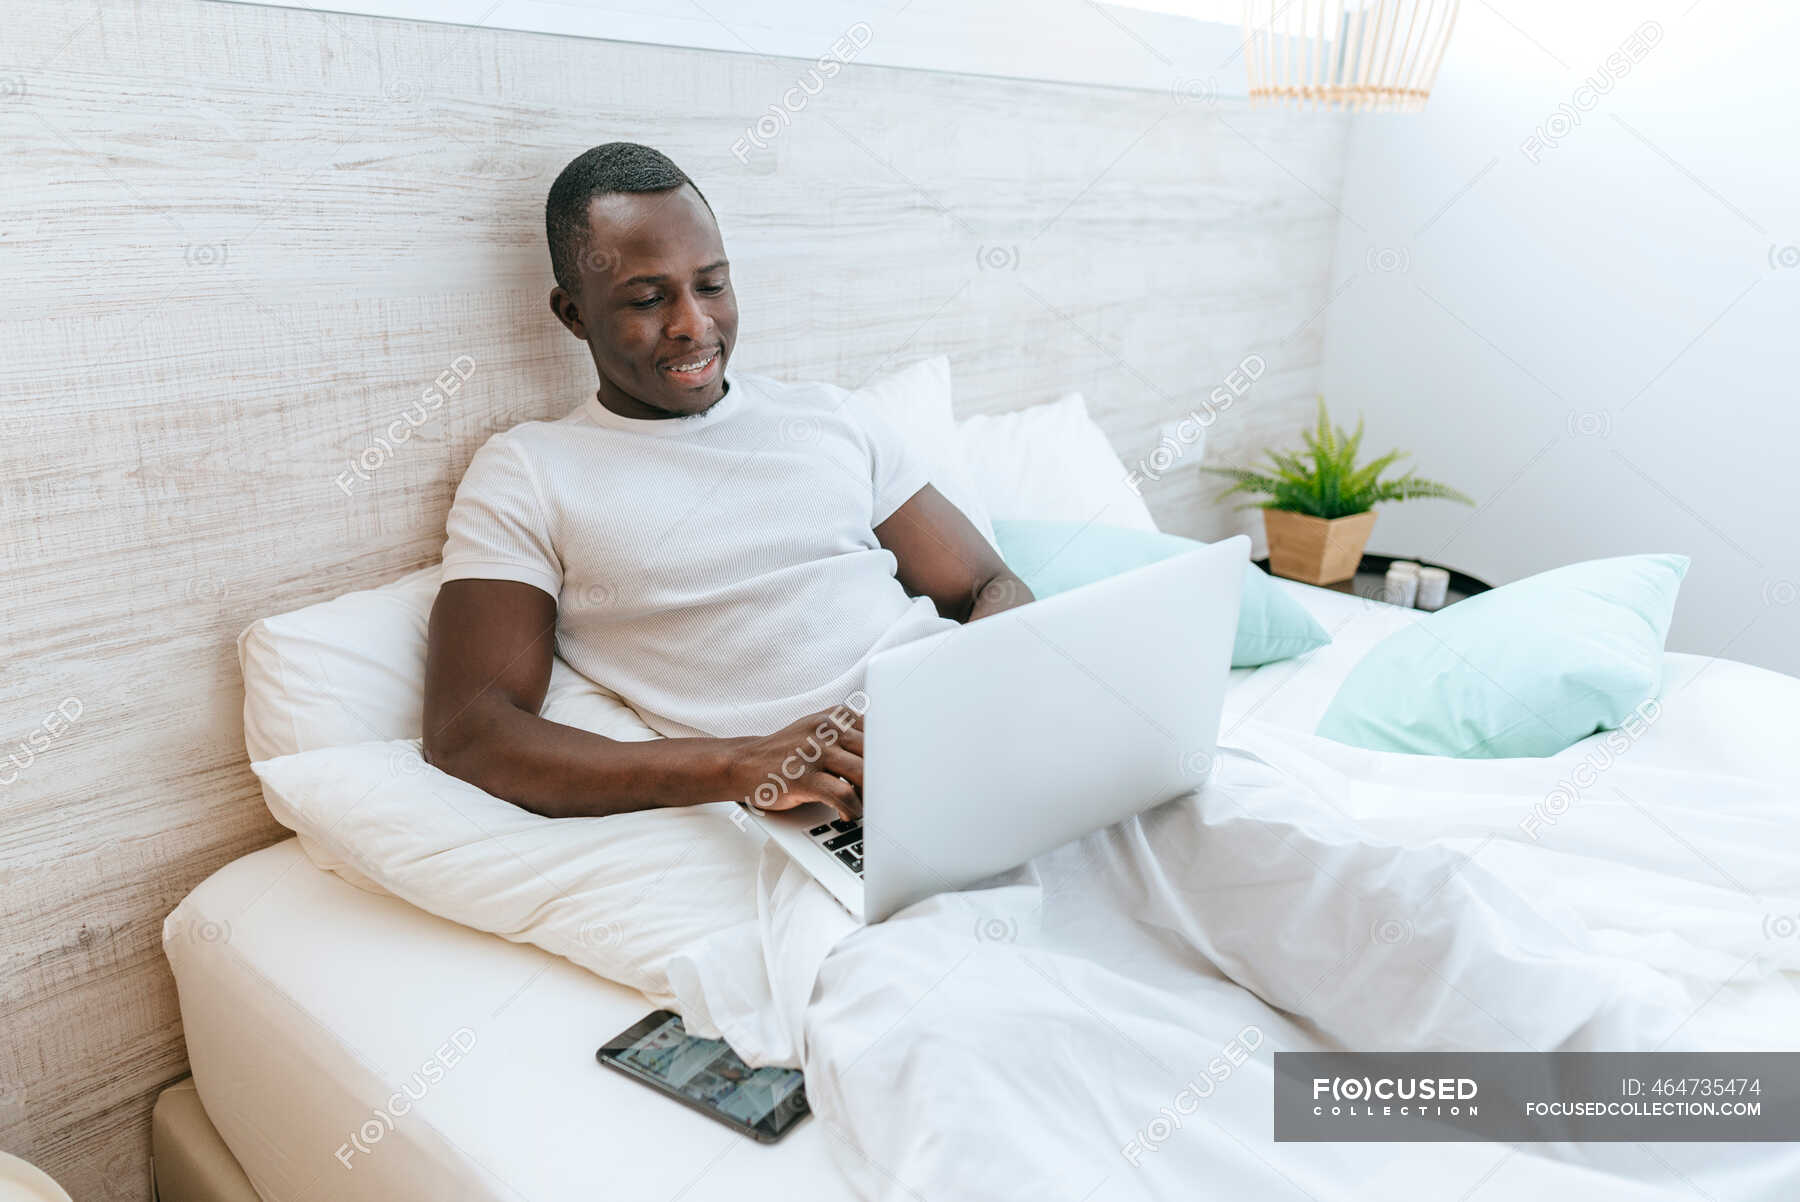 Wolkenkrabber pijp Signaal Young man lying in bed using laptop at home — relaxed, weekend - Stock  Photo | #464735474